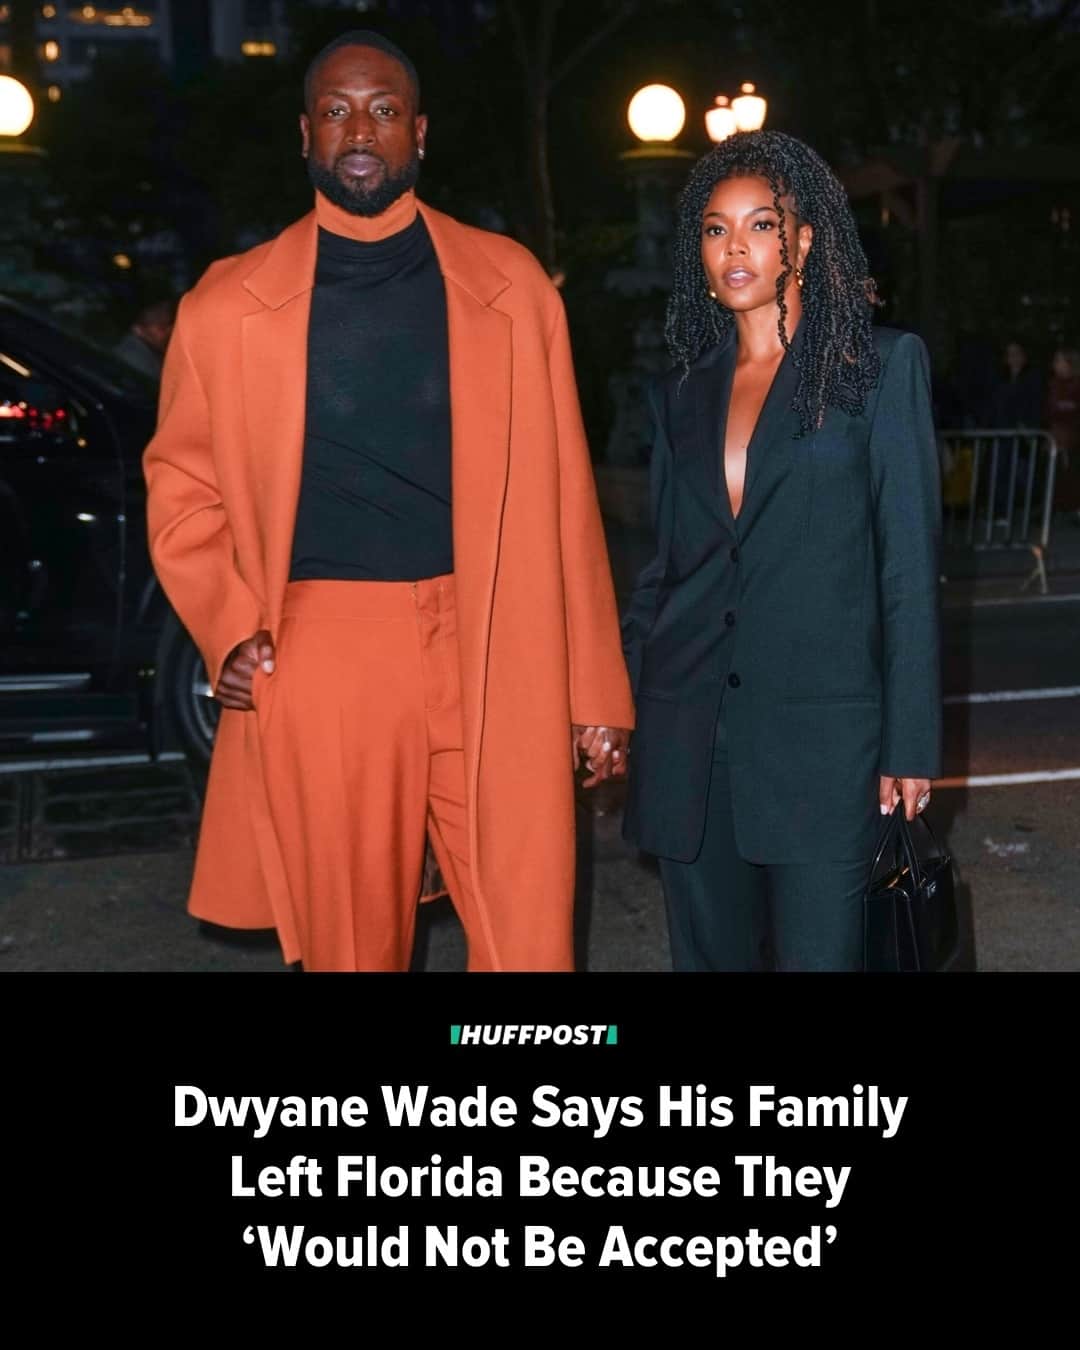 Huffington Postさんのインスタグラム写真 - (Huffington PostInstagram)「Retired NBA great Dwyane Wade said his family left Florida because of the state’s restrictive laws targeting LGBTQ+ people in an interview set to air this week.⁠ ⁠ Wade made the comments for Showtime’s “Headliners” series which airs Thursday, telling host Rachel Nichols his family moved to California after he retired from the NBA in 2019. Wade’s 15-year-old daughter, Zaya, is transgender.⁠ ⁠ “That’s another reason why I don’t live in that state,” he said. “A lot of people don’t know that. I have to make decisions for my family, not just personal, individual decisions. Obviously, the taxes is great. Having Wade County is great. But my family would not be accepted or feel comfortable there.”⁠ ⁠ “And so that’s one of the reasons why I don’t live there.”⁠ ⁠ Florida has become an epicenter of Republican efforts to limit the freedoms of LGBTQ+ Americans. Gov. Ron DeSantis (R) has unleashed a government attack against Disney after the company opposed his “Don’t Say Gay” legislation. State lawmakers have since expanded that law, and have moved to limit gender-affirming care for transgender youth and punish businesses that host drag shows.⁠ ⁠ Read more at our link in bio. // 📷 Getty Images // 🖊️ Nick Visser」4月28日 6時15分 - huffpost